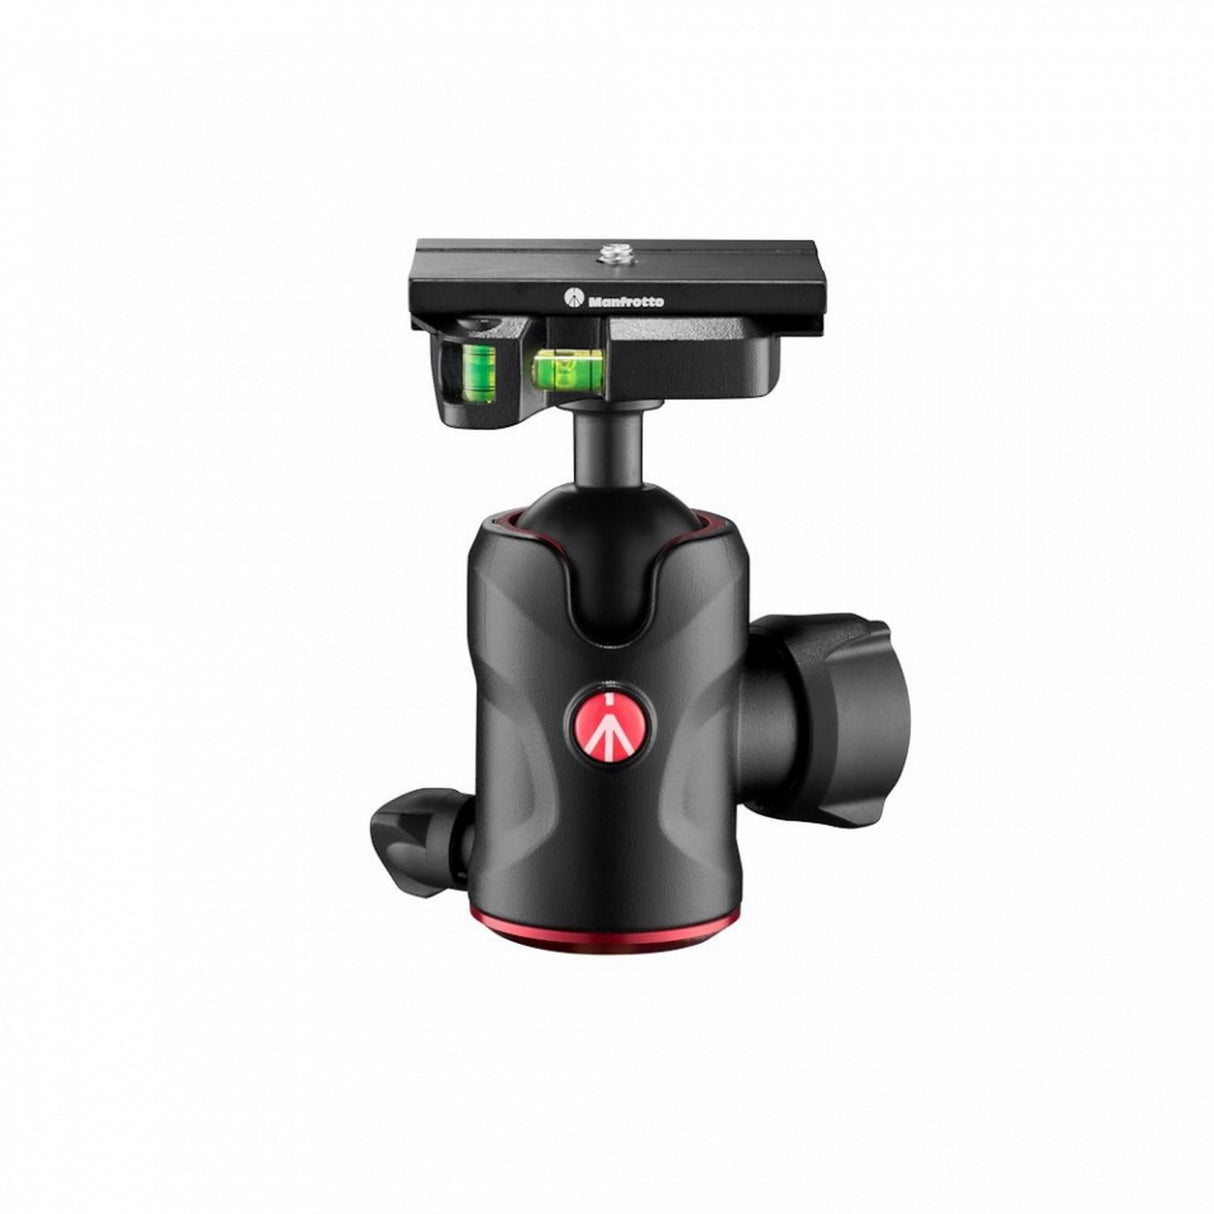 Manfrotto MH496-Q6 496 Centre Ball Head with Top Lock Plate